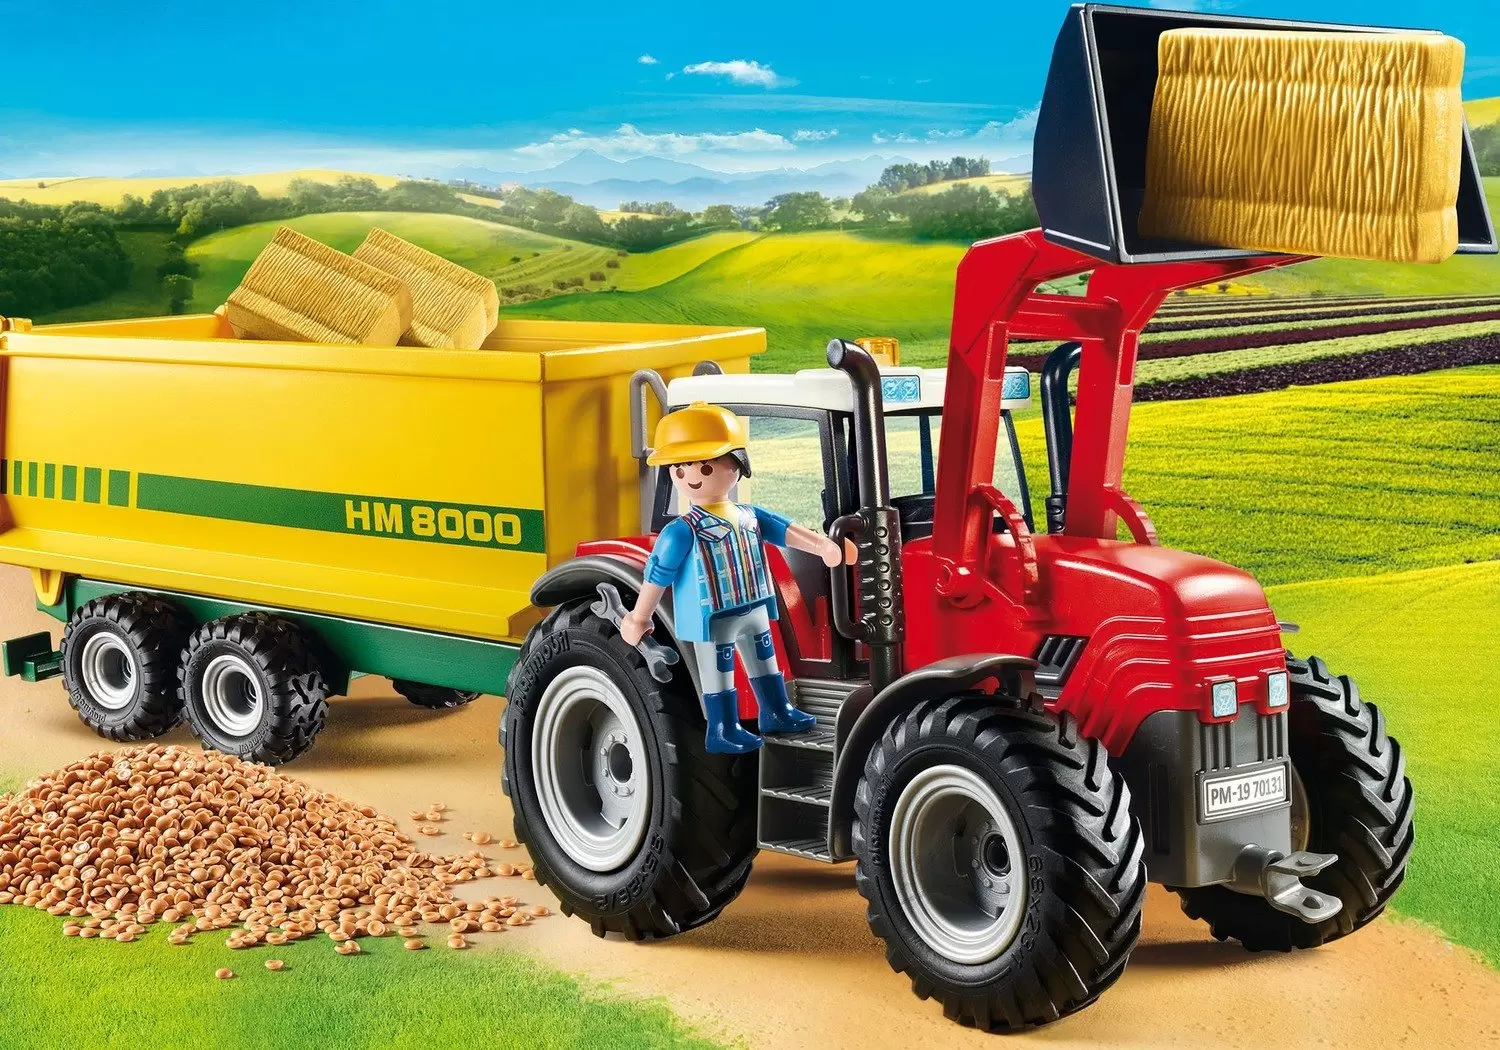 Country Big and HM8000 trailer - Playmobil 70131